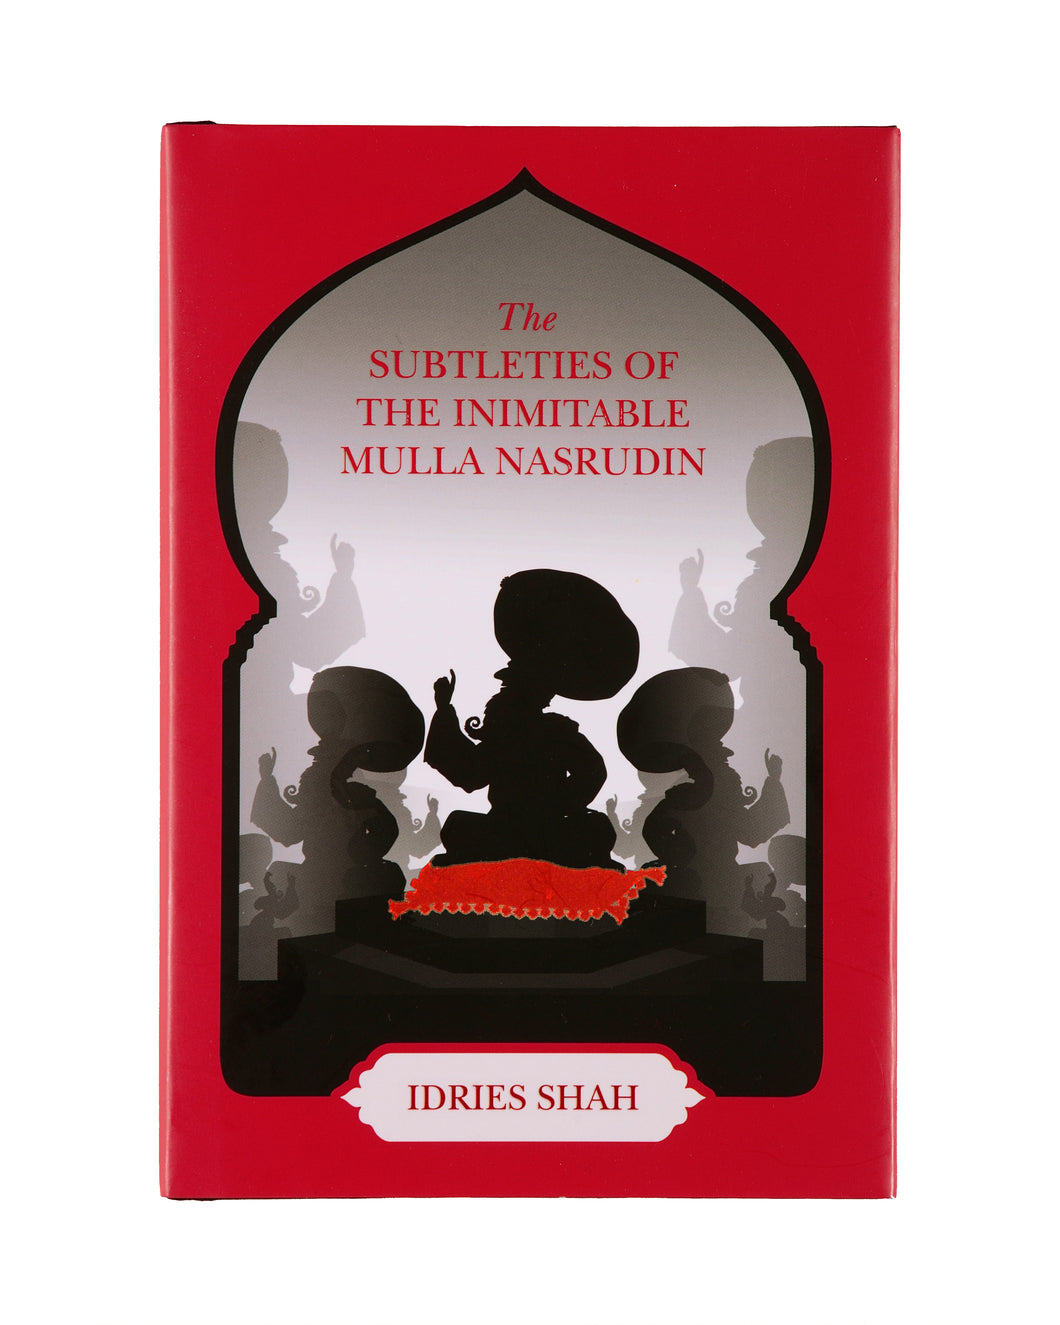 The Subleties of the Inimitable Mulla Nasrudin Limited Edition Hardcover